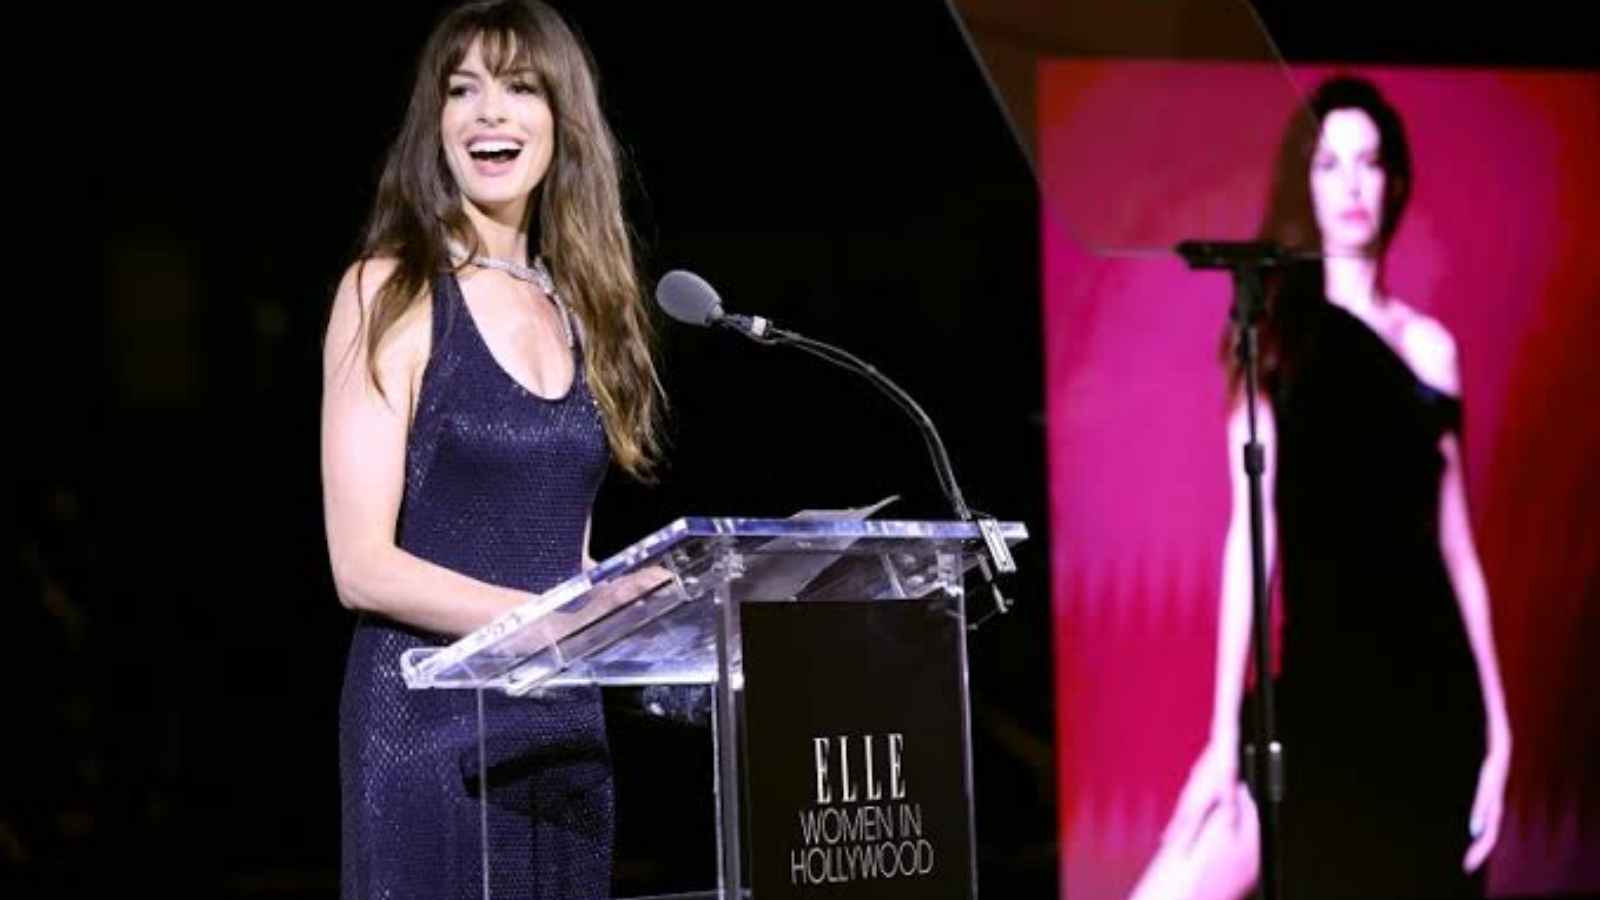 Anne Hathaway during the ELLE event